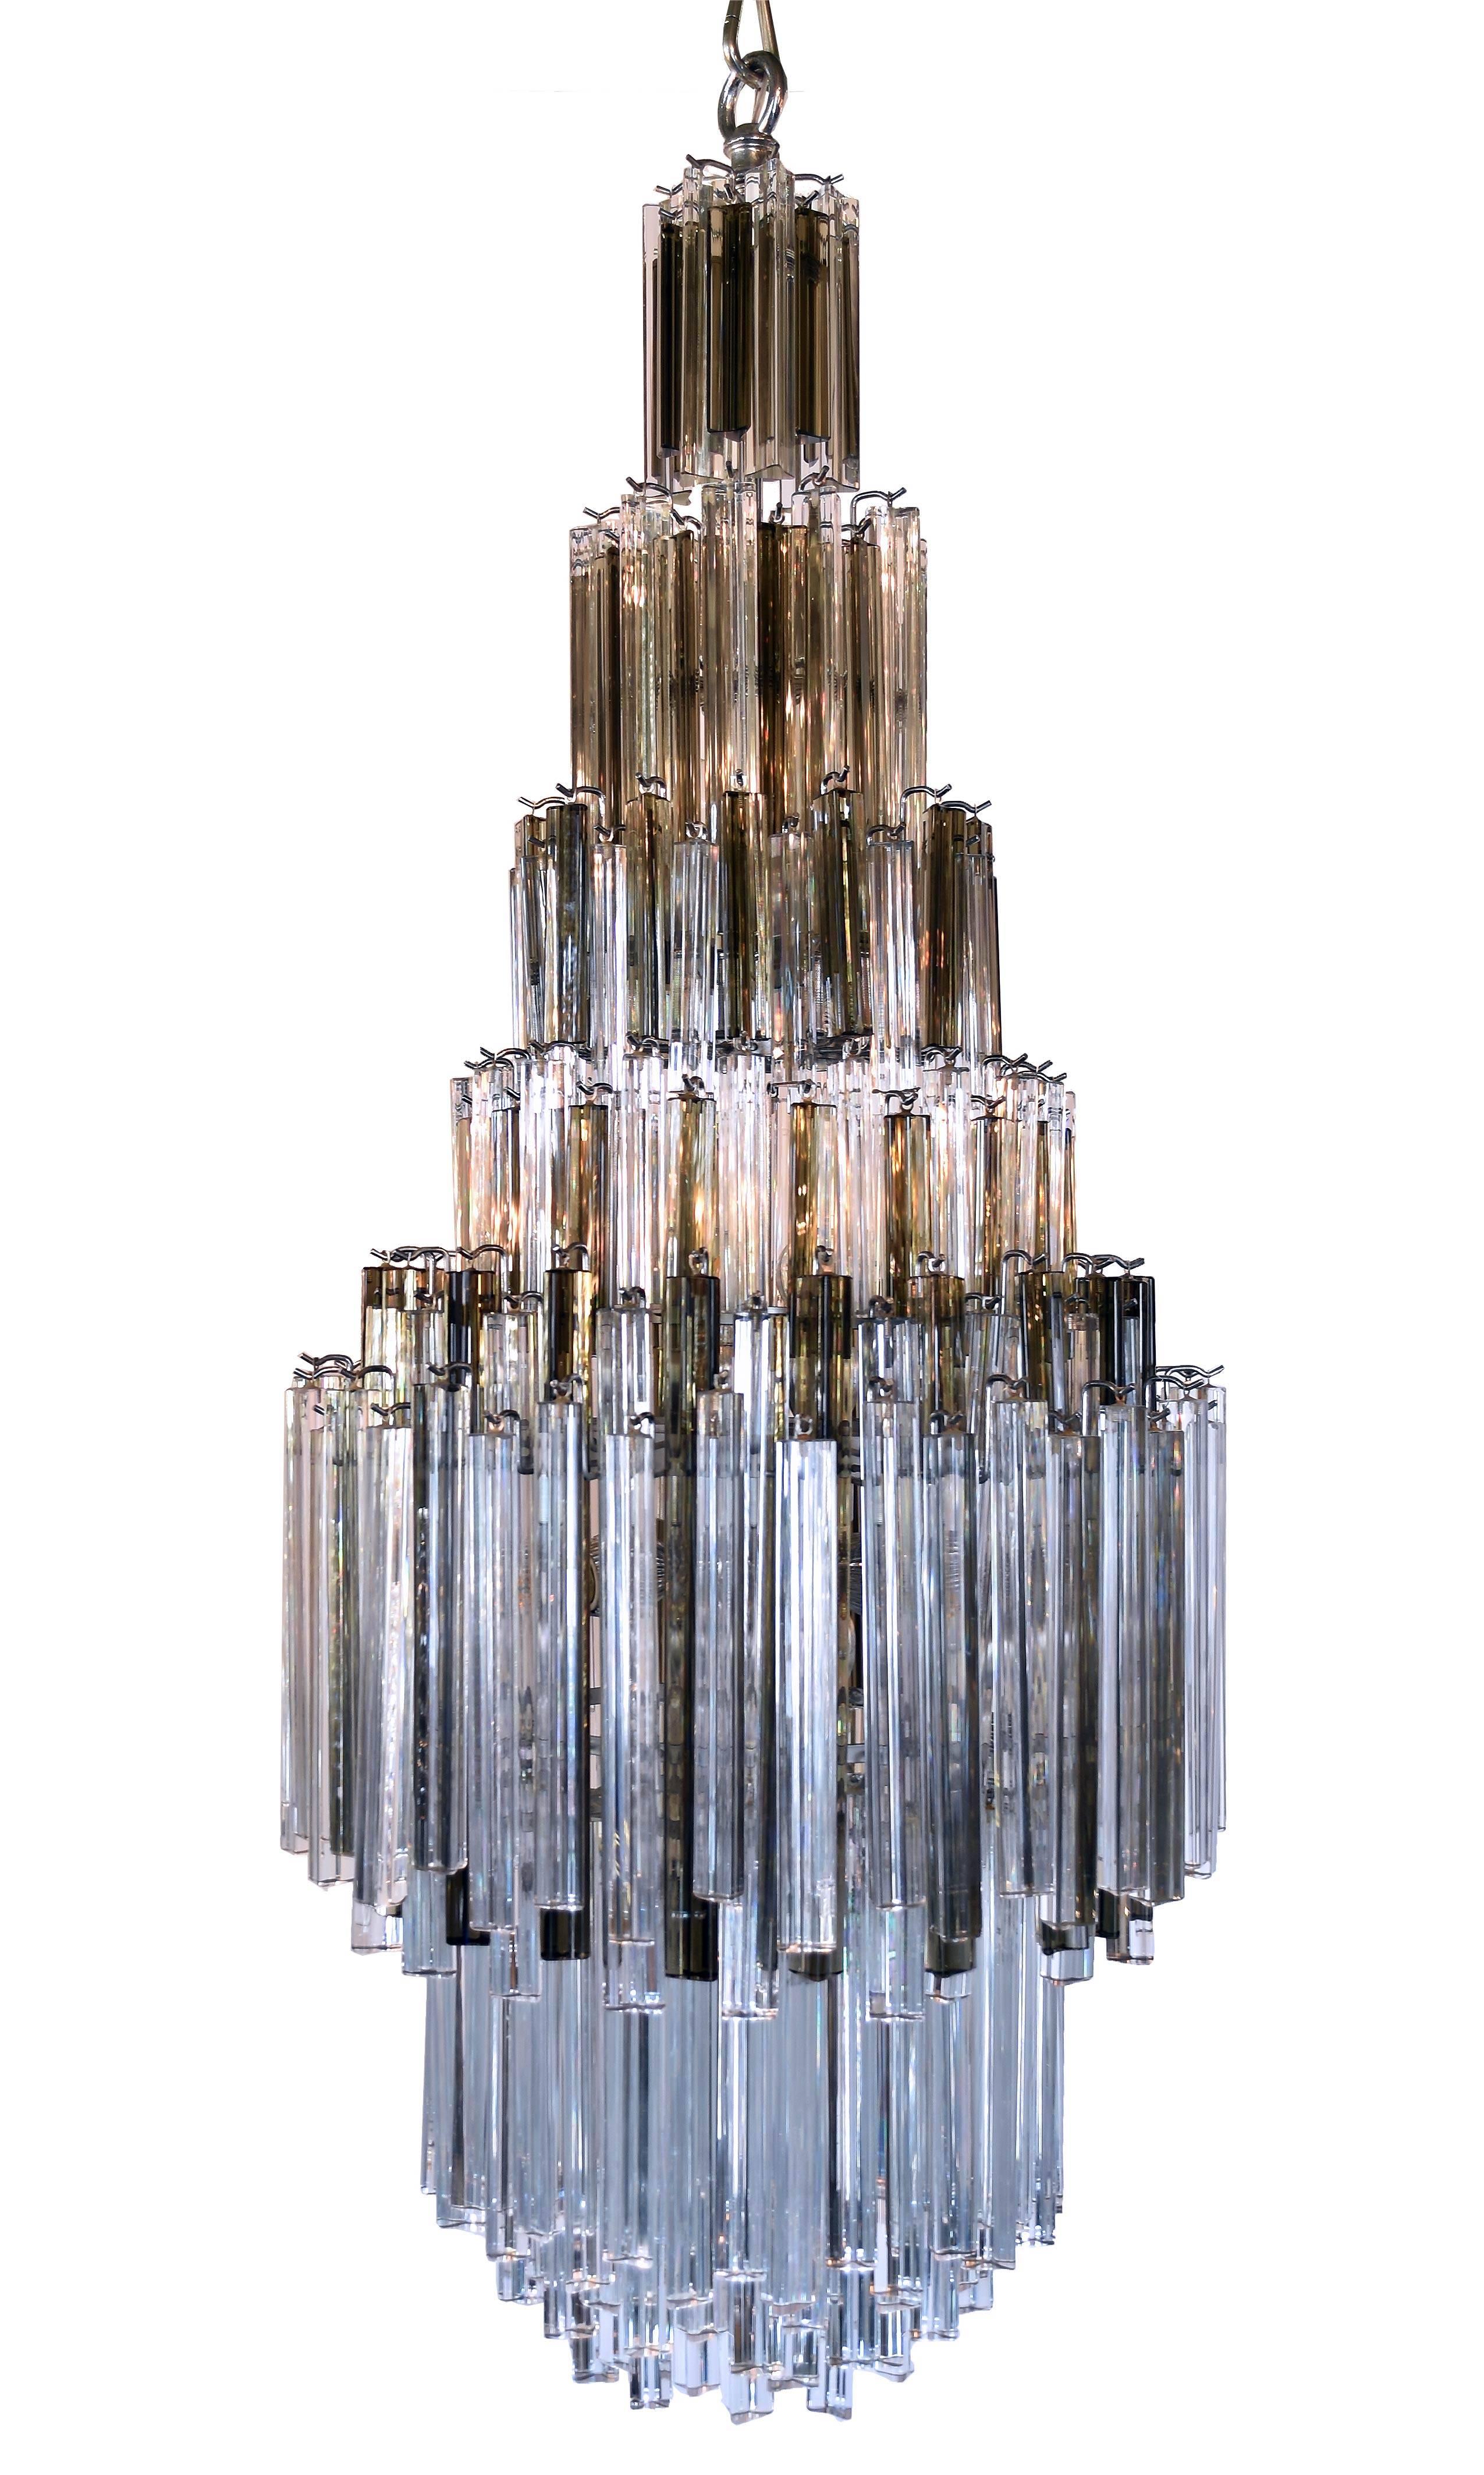 Multiple tiers of Italian Murano Triedri crystals, including both smoked and clear, adorn this chandelier manufactured by Venini of Murano, Italy. This chandelier is perfectly refined to reflect ideas of elegance in conjunction with a style that is